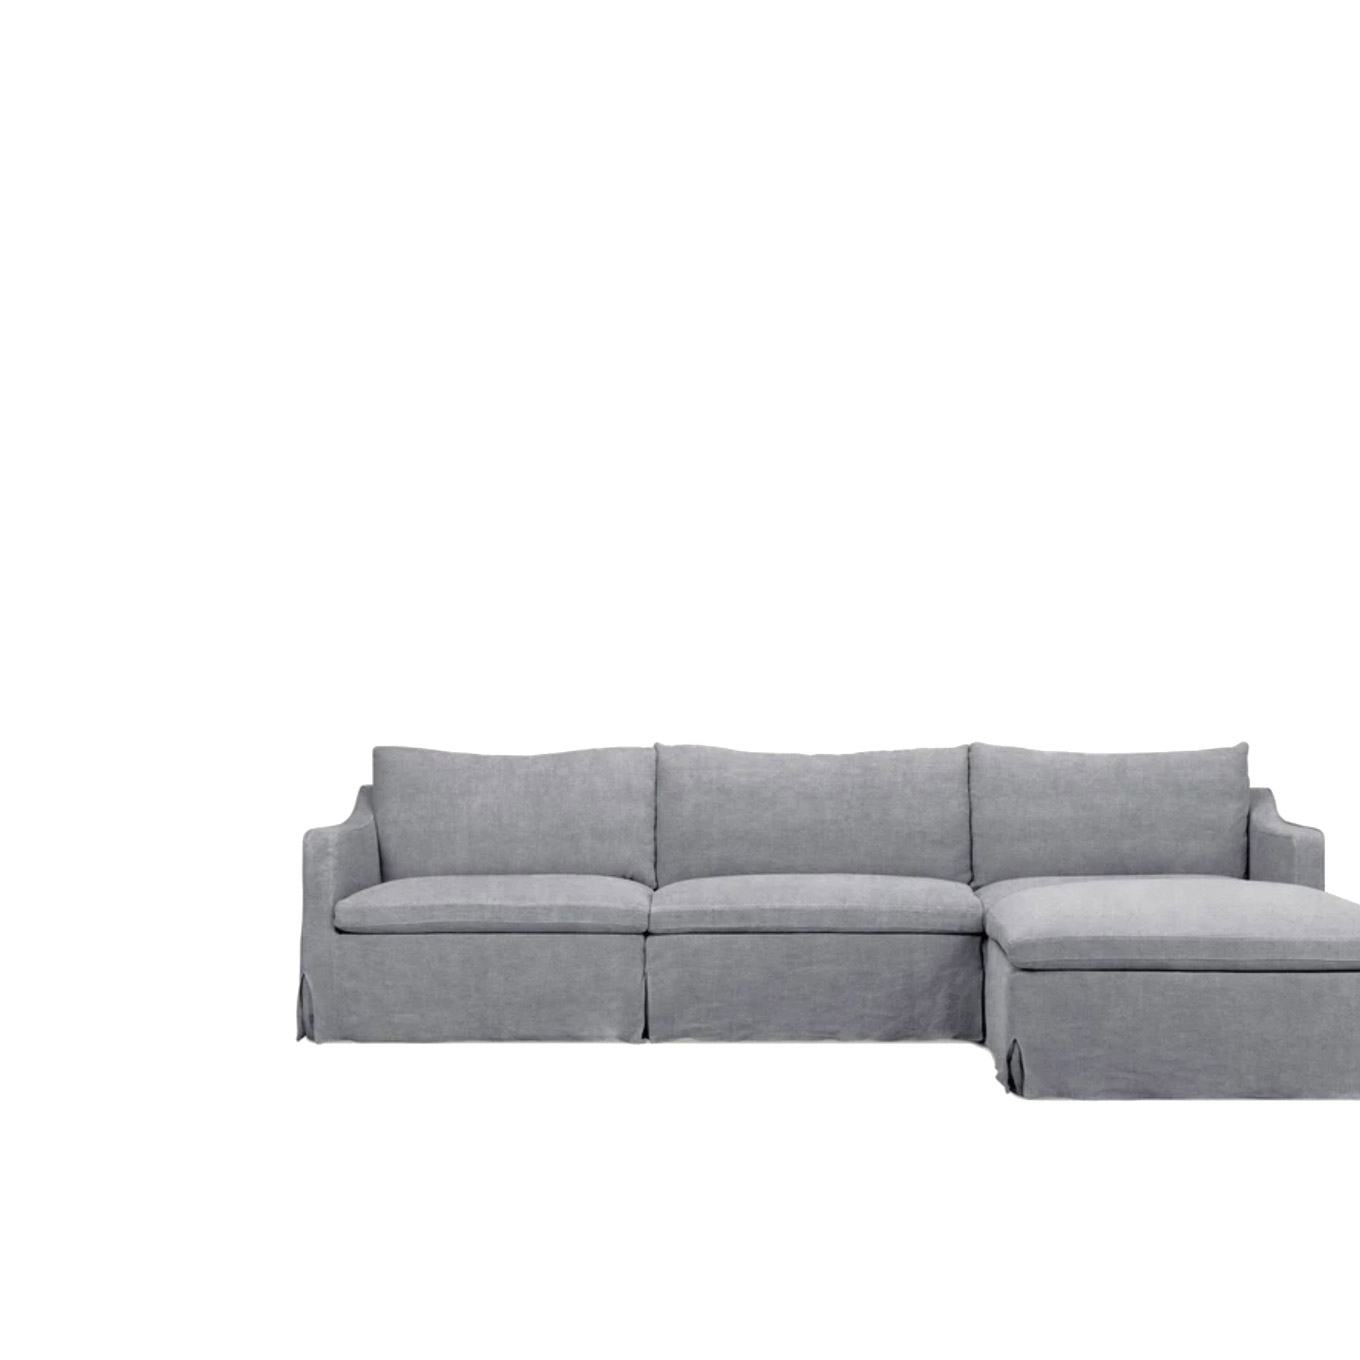 Amelia Chaise Sectional featured in Best Products